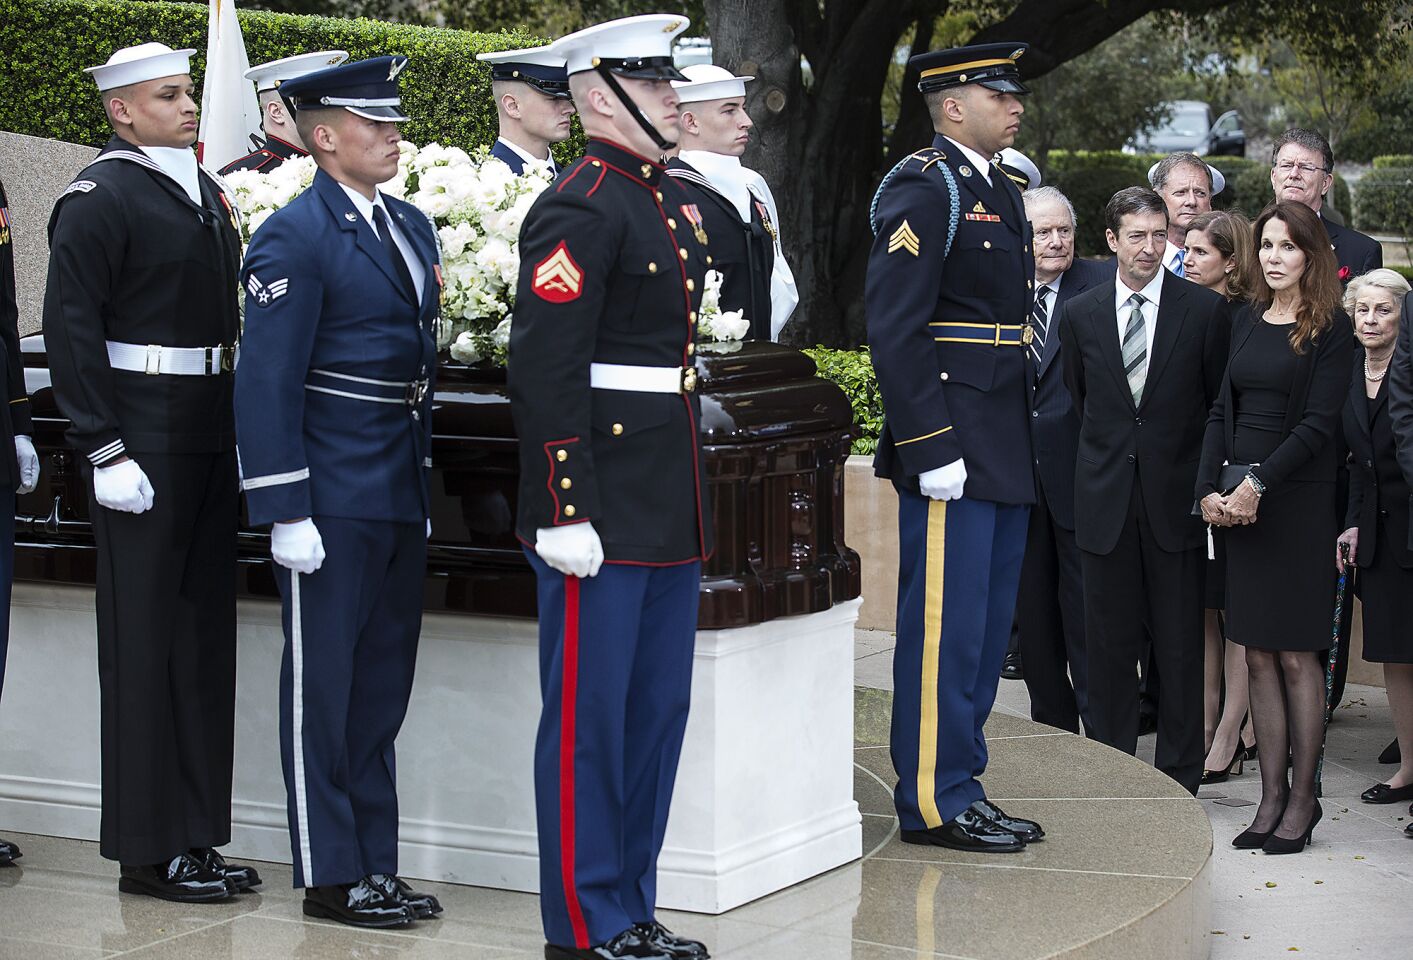 A military honor guard places Nancy Reagan's casket at her gravesite at the Ronald Reagan Presidential Library in Simi Valley.